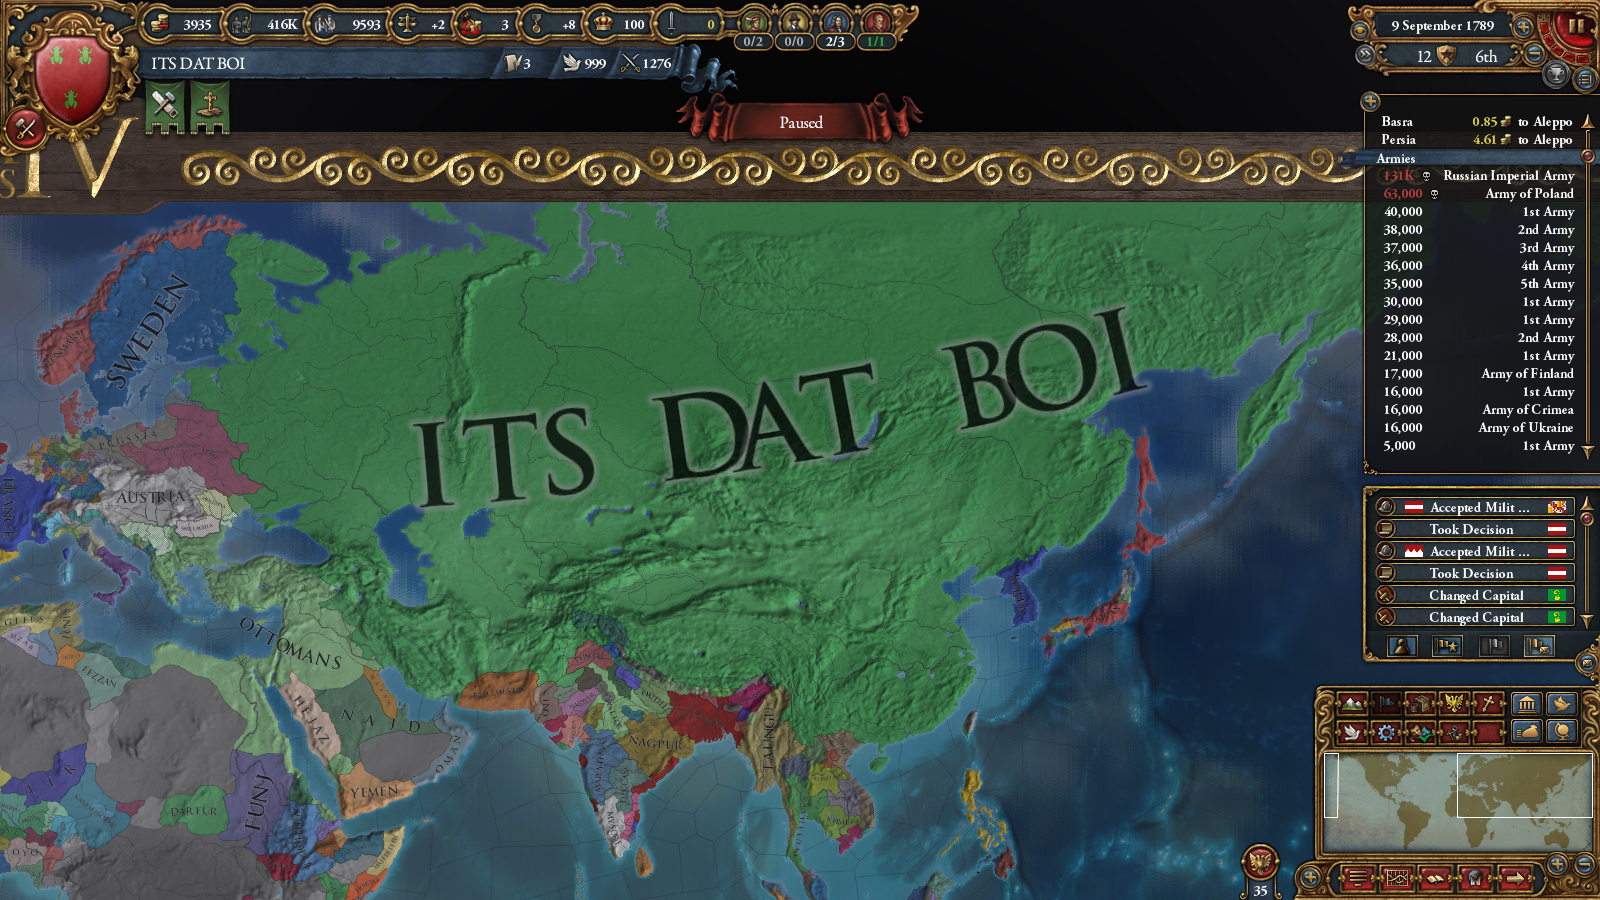 So I've been playing Eu4 for a time now...